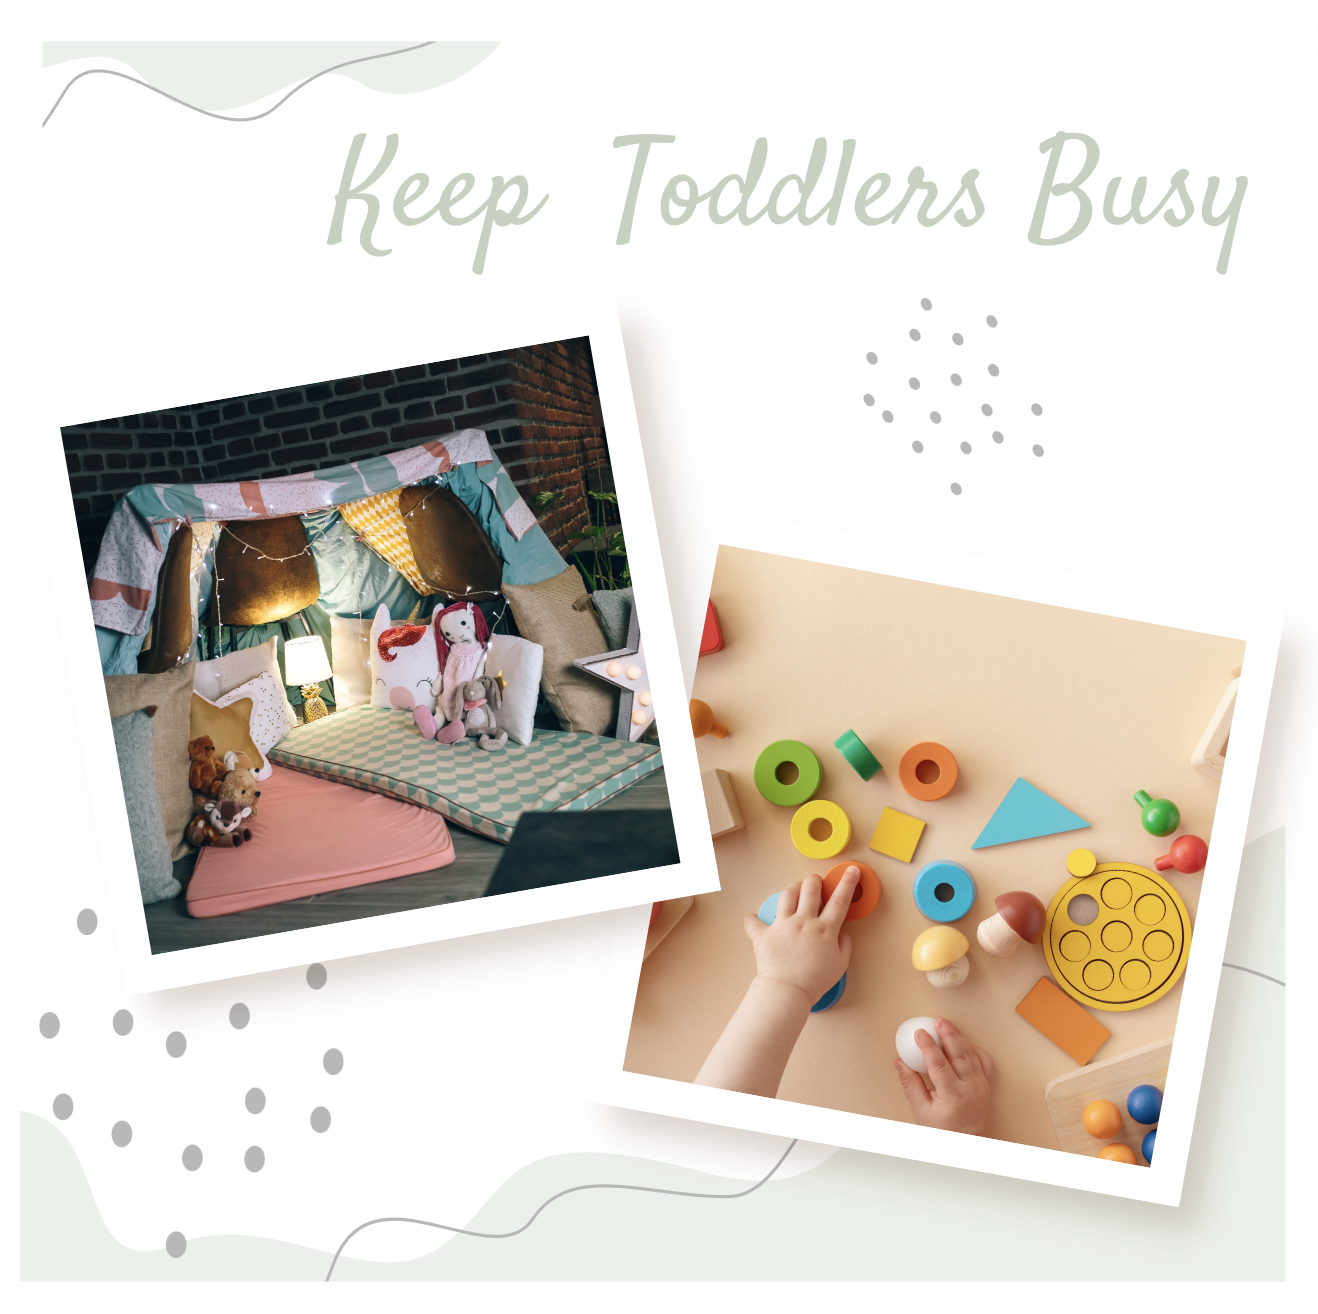 How to keep toddler busy